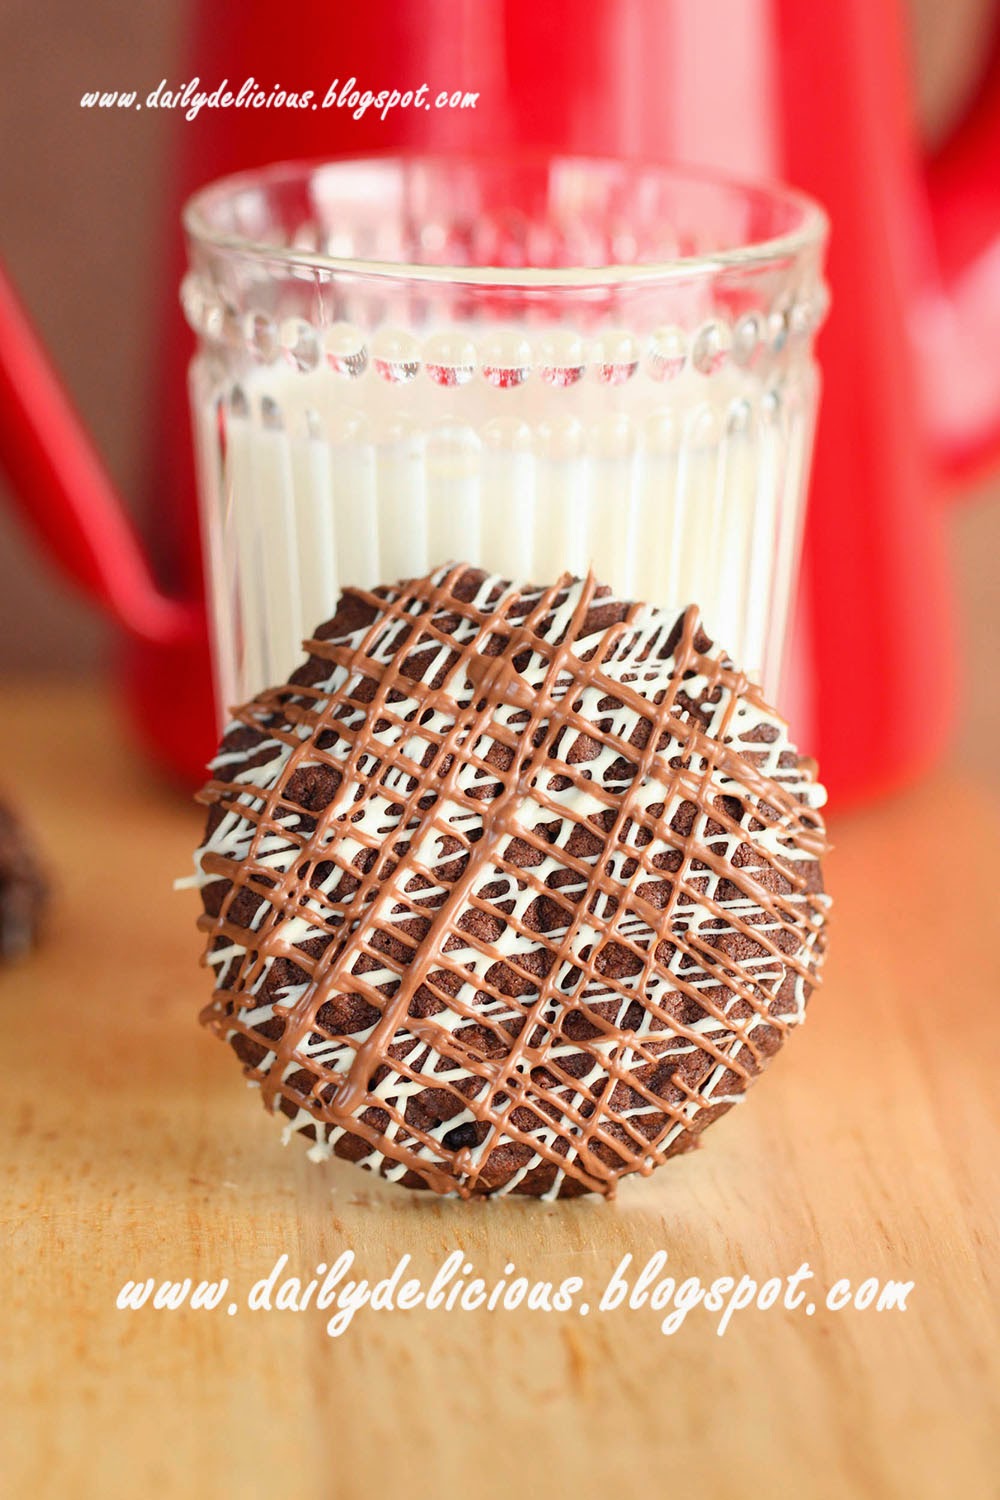 dailydelicious: Triple chocolate cookies: Enough chocolate to boost ...